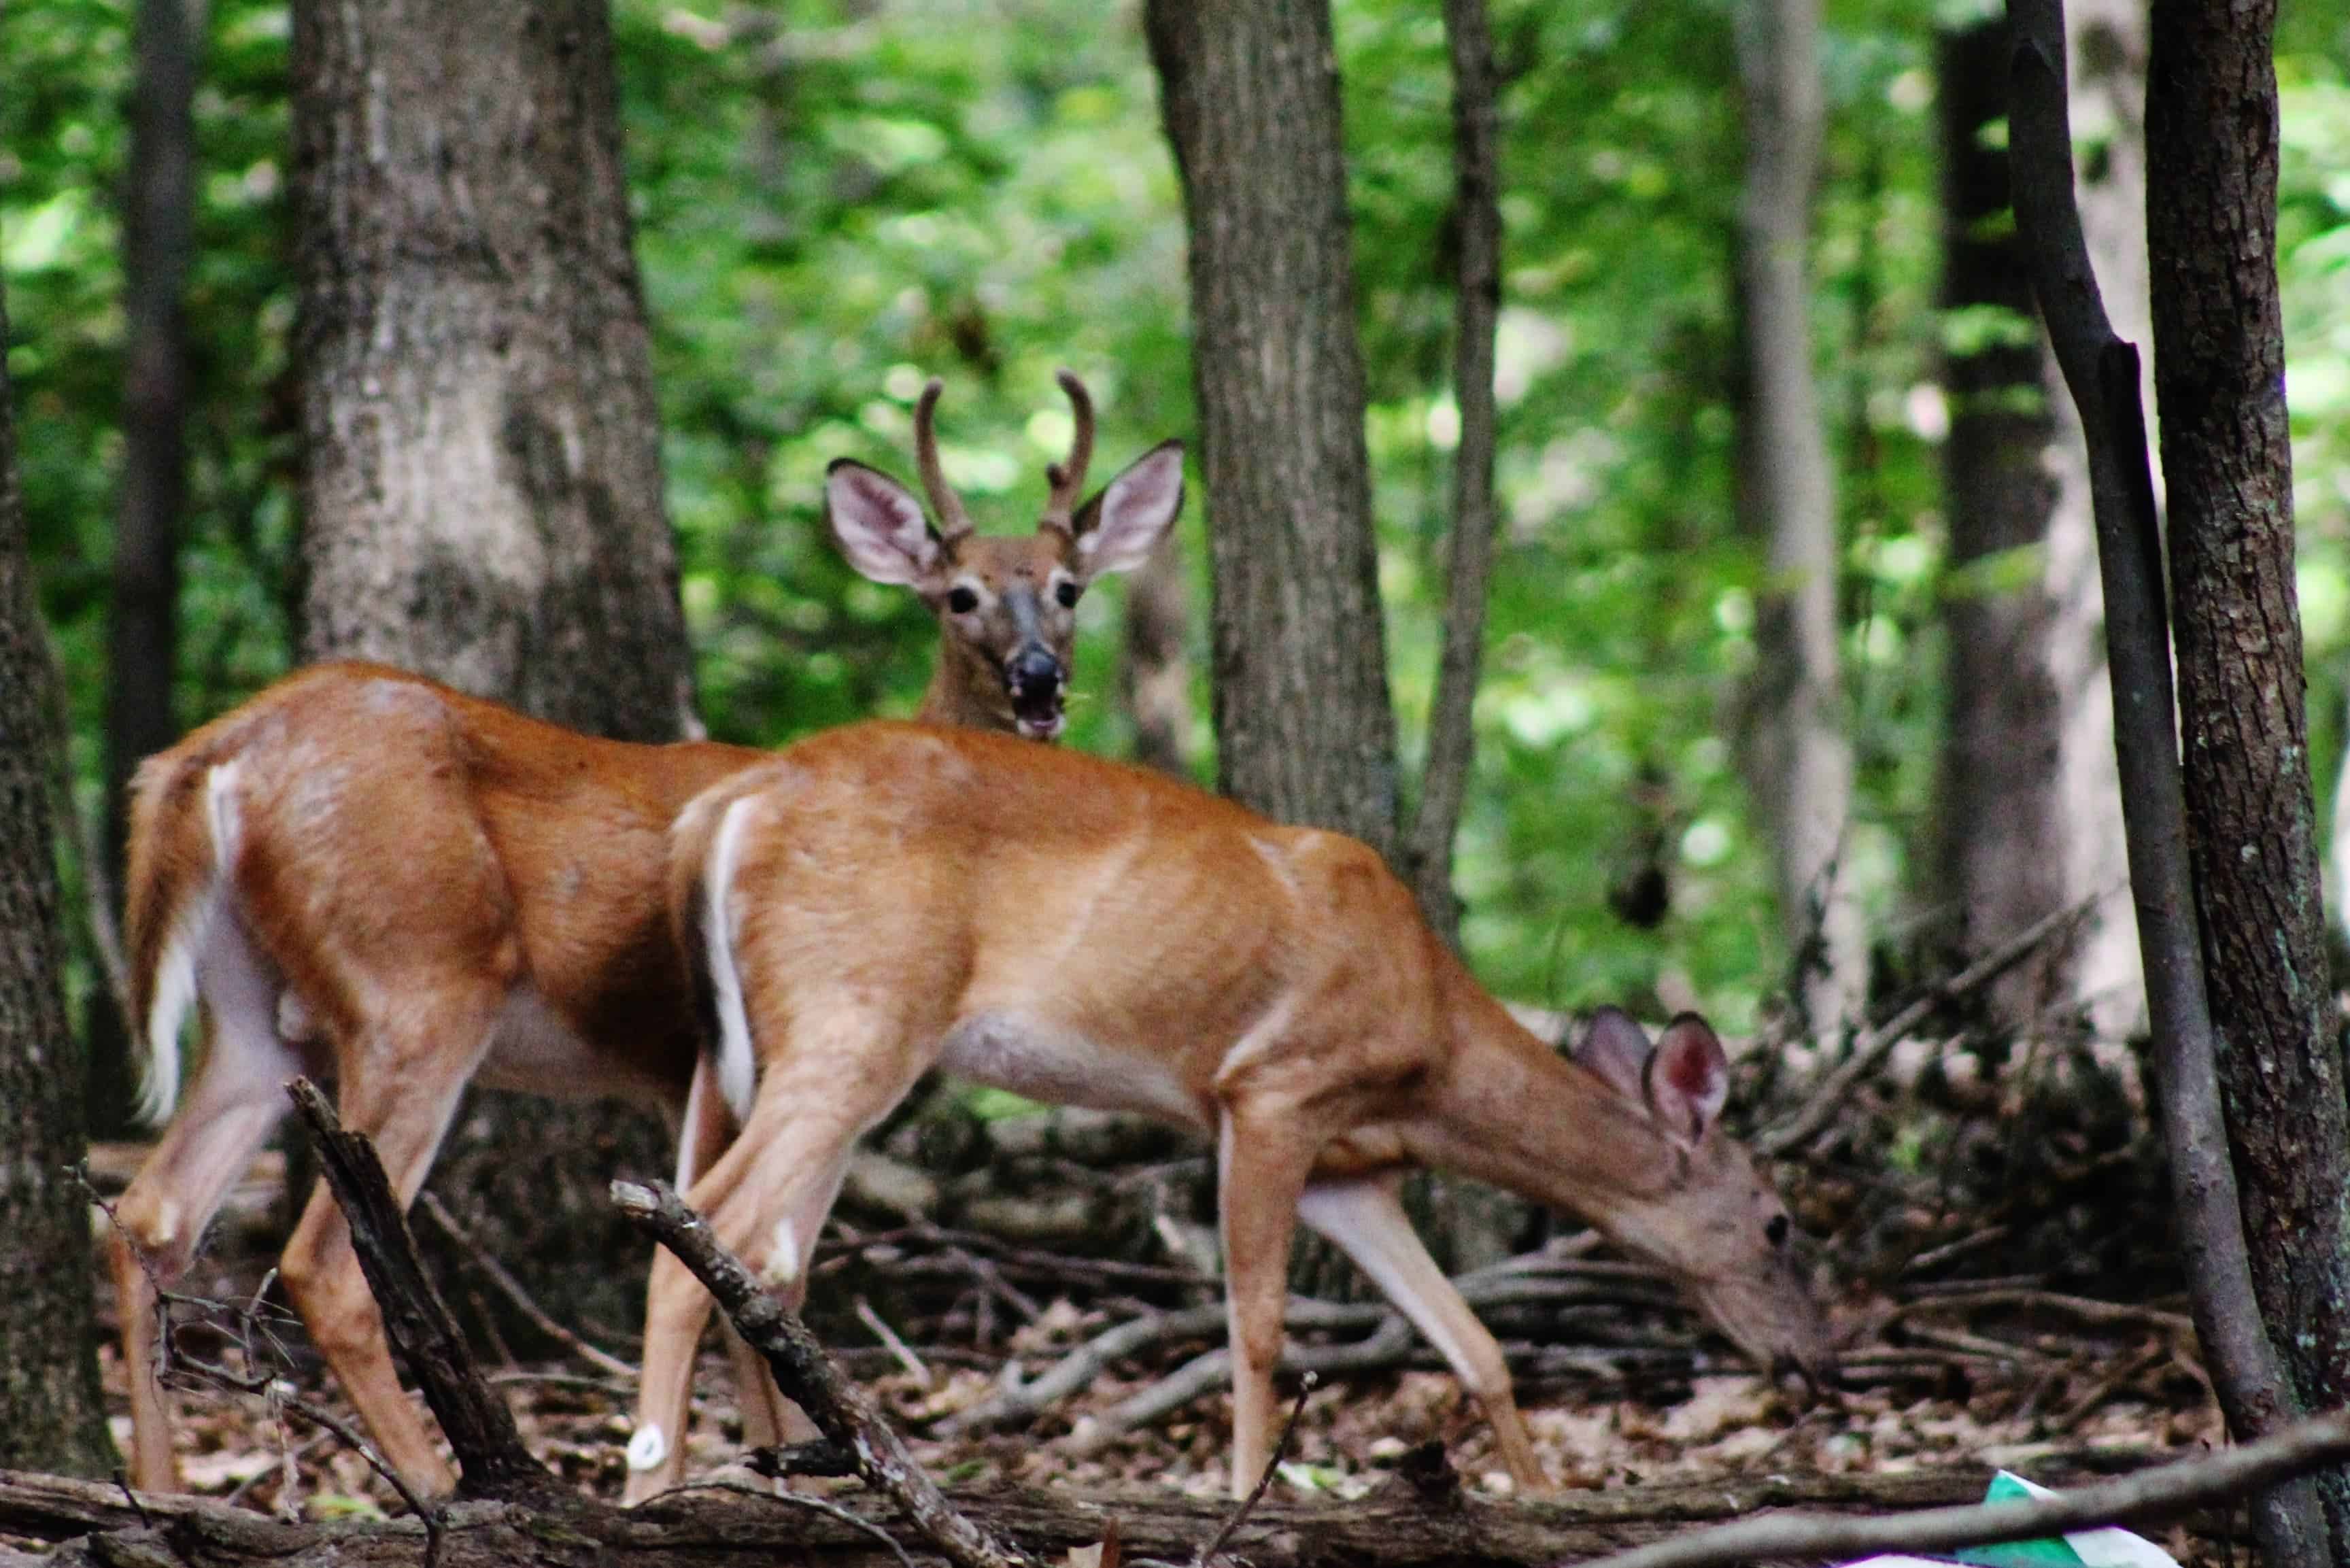 How deer are shaping the sounds of the forest